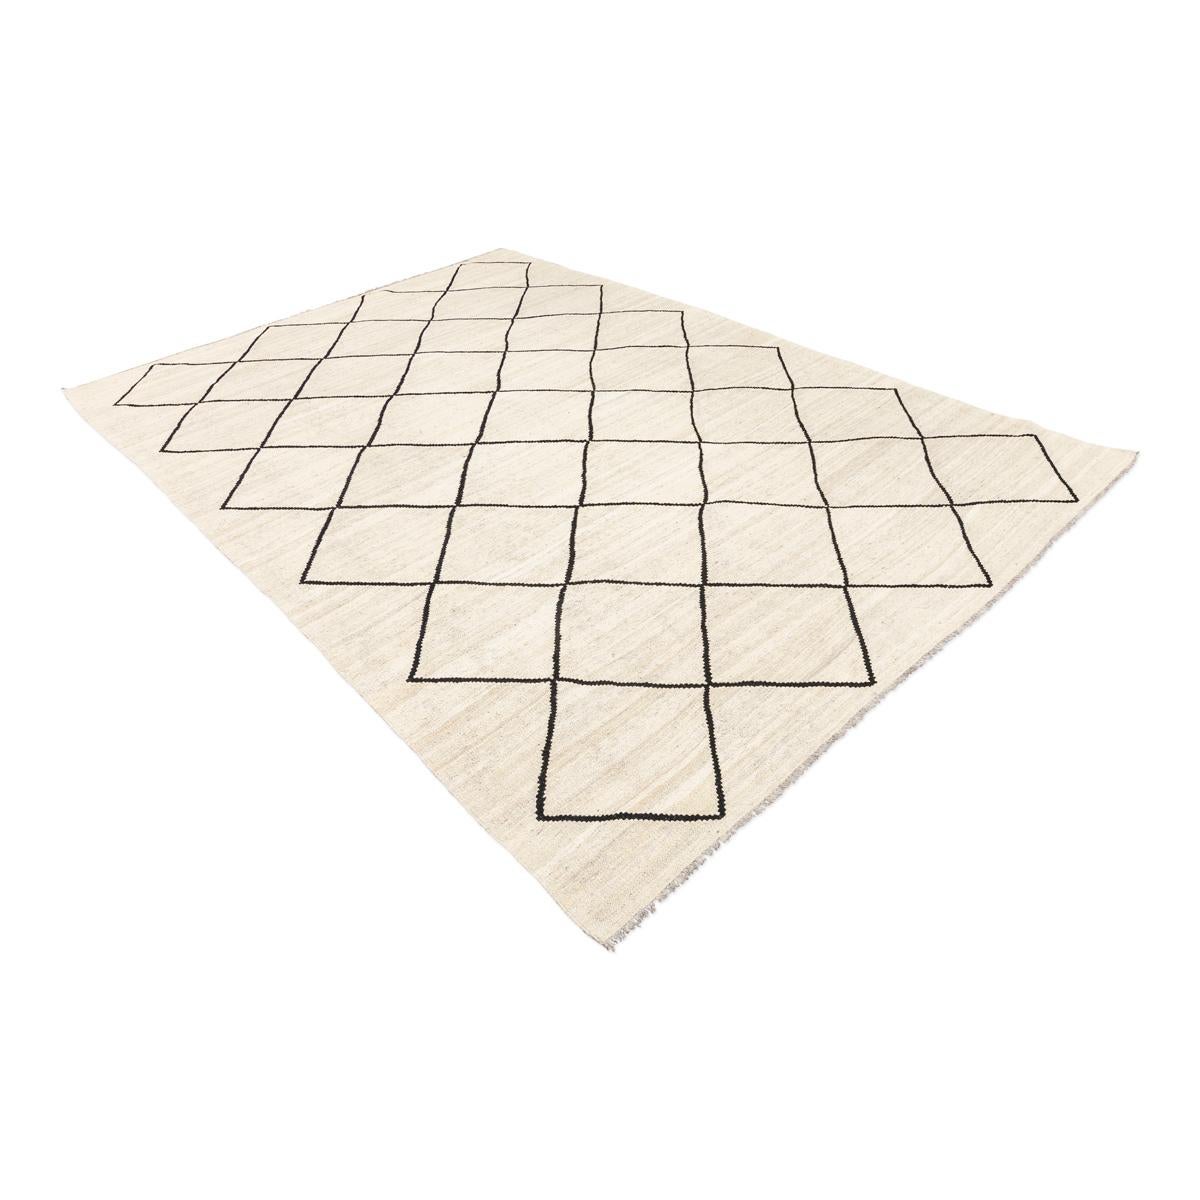 Contemporary Kilim handcrafted in the craft workshops that the Zigler firm has in Pakistan
- Made with aged wool over beige and black colors.
- Its design is a reinterpretation of the rugs of the North Atlas of Morocco. This type of rugs are a